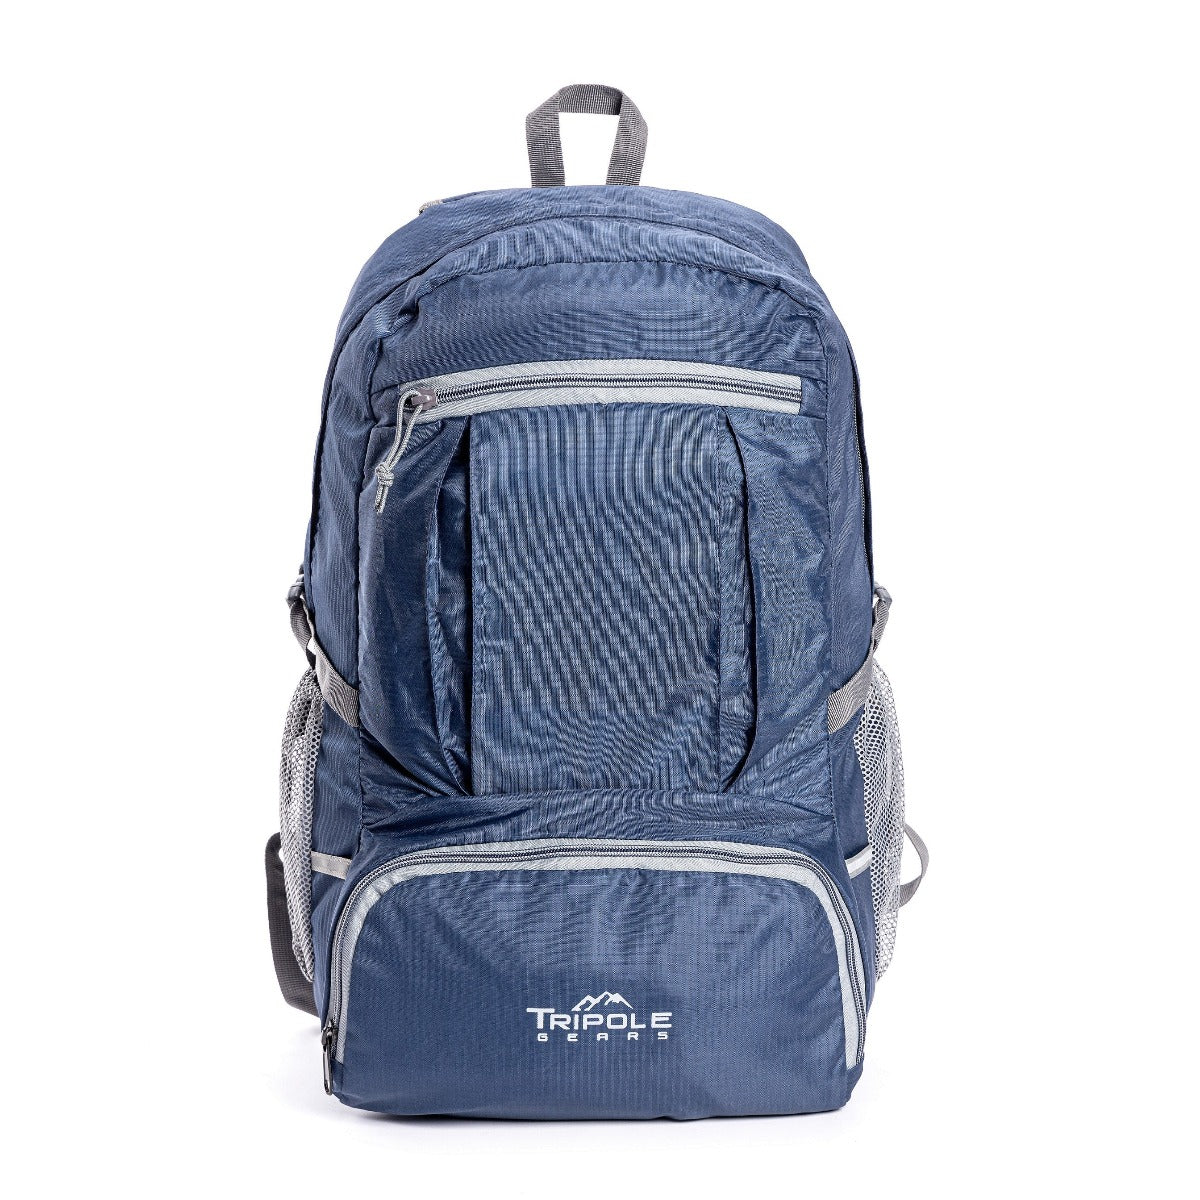 Foldable PAKEASY Backpack and Day Bag for Hiking and Day Trips - Blue 3